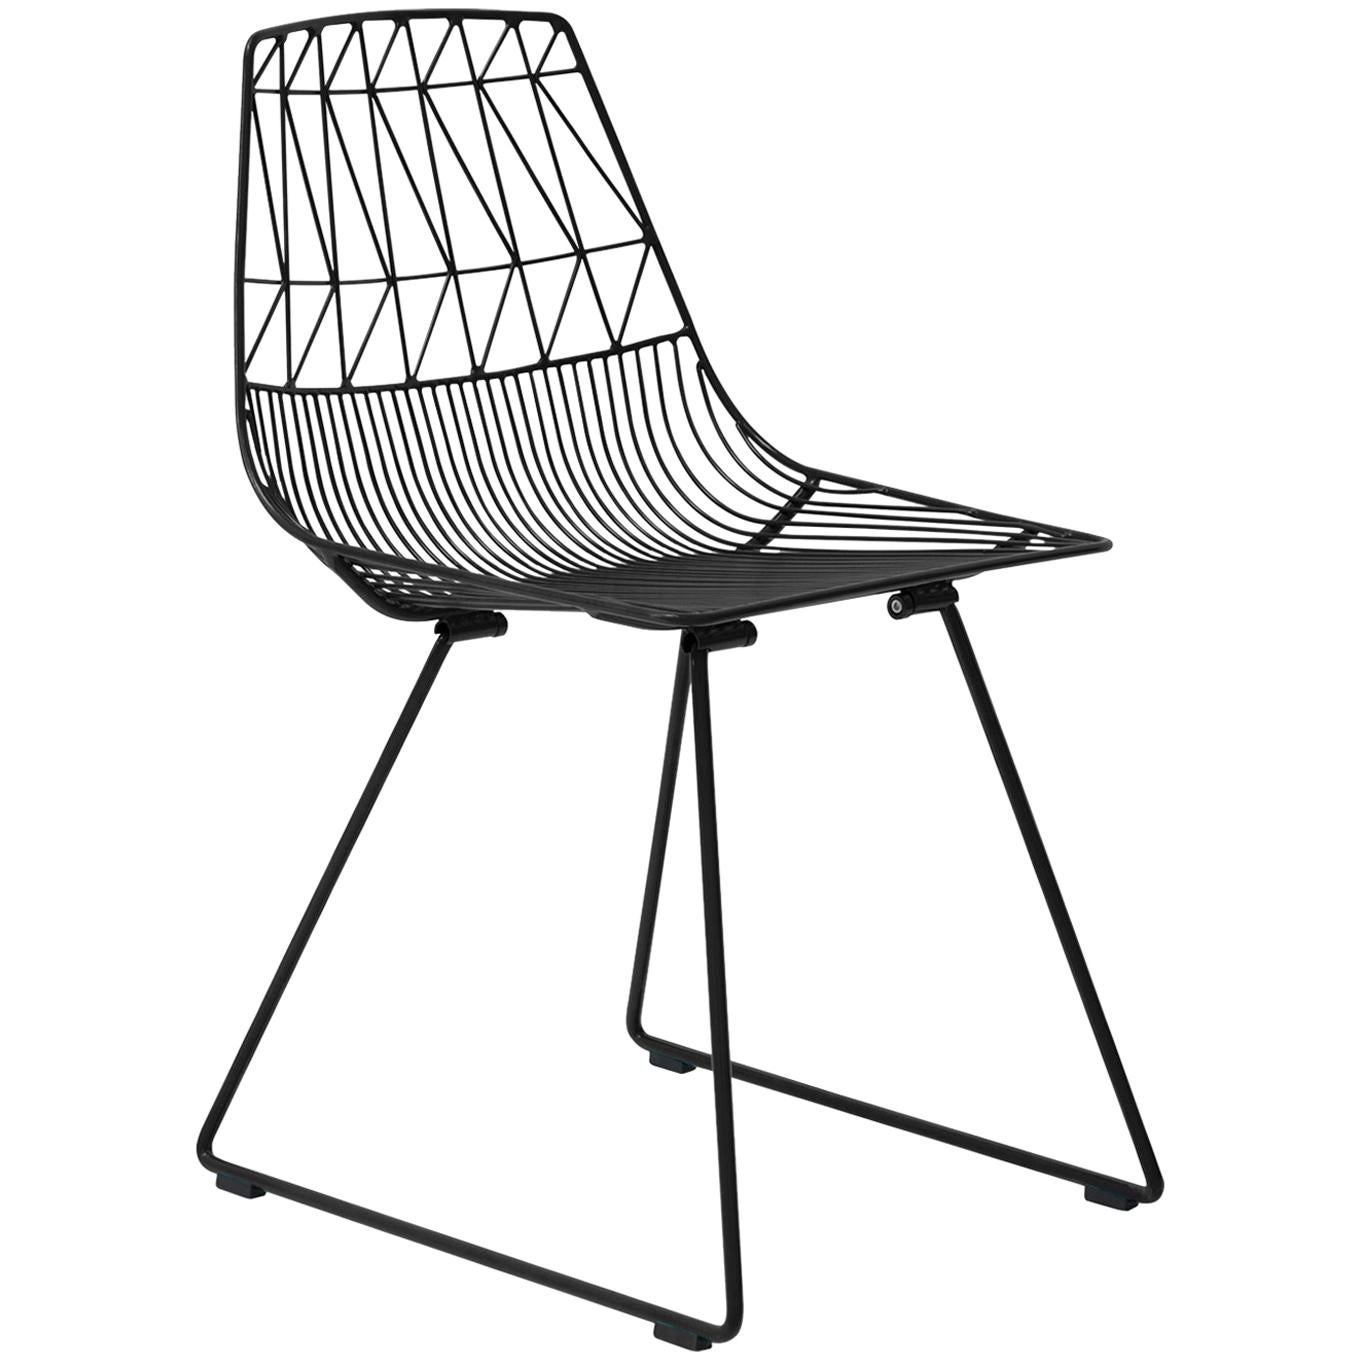 Mid-Century Modern, Minimalist Wire Chair, the Lucy Chair in Black by Bend Goods